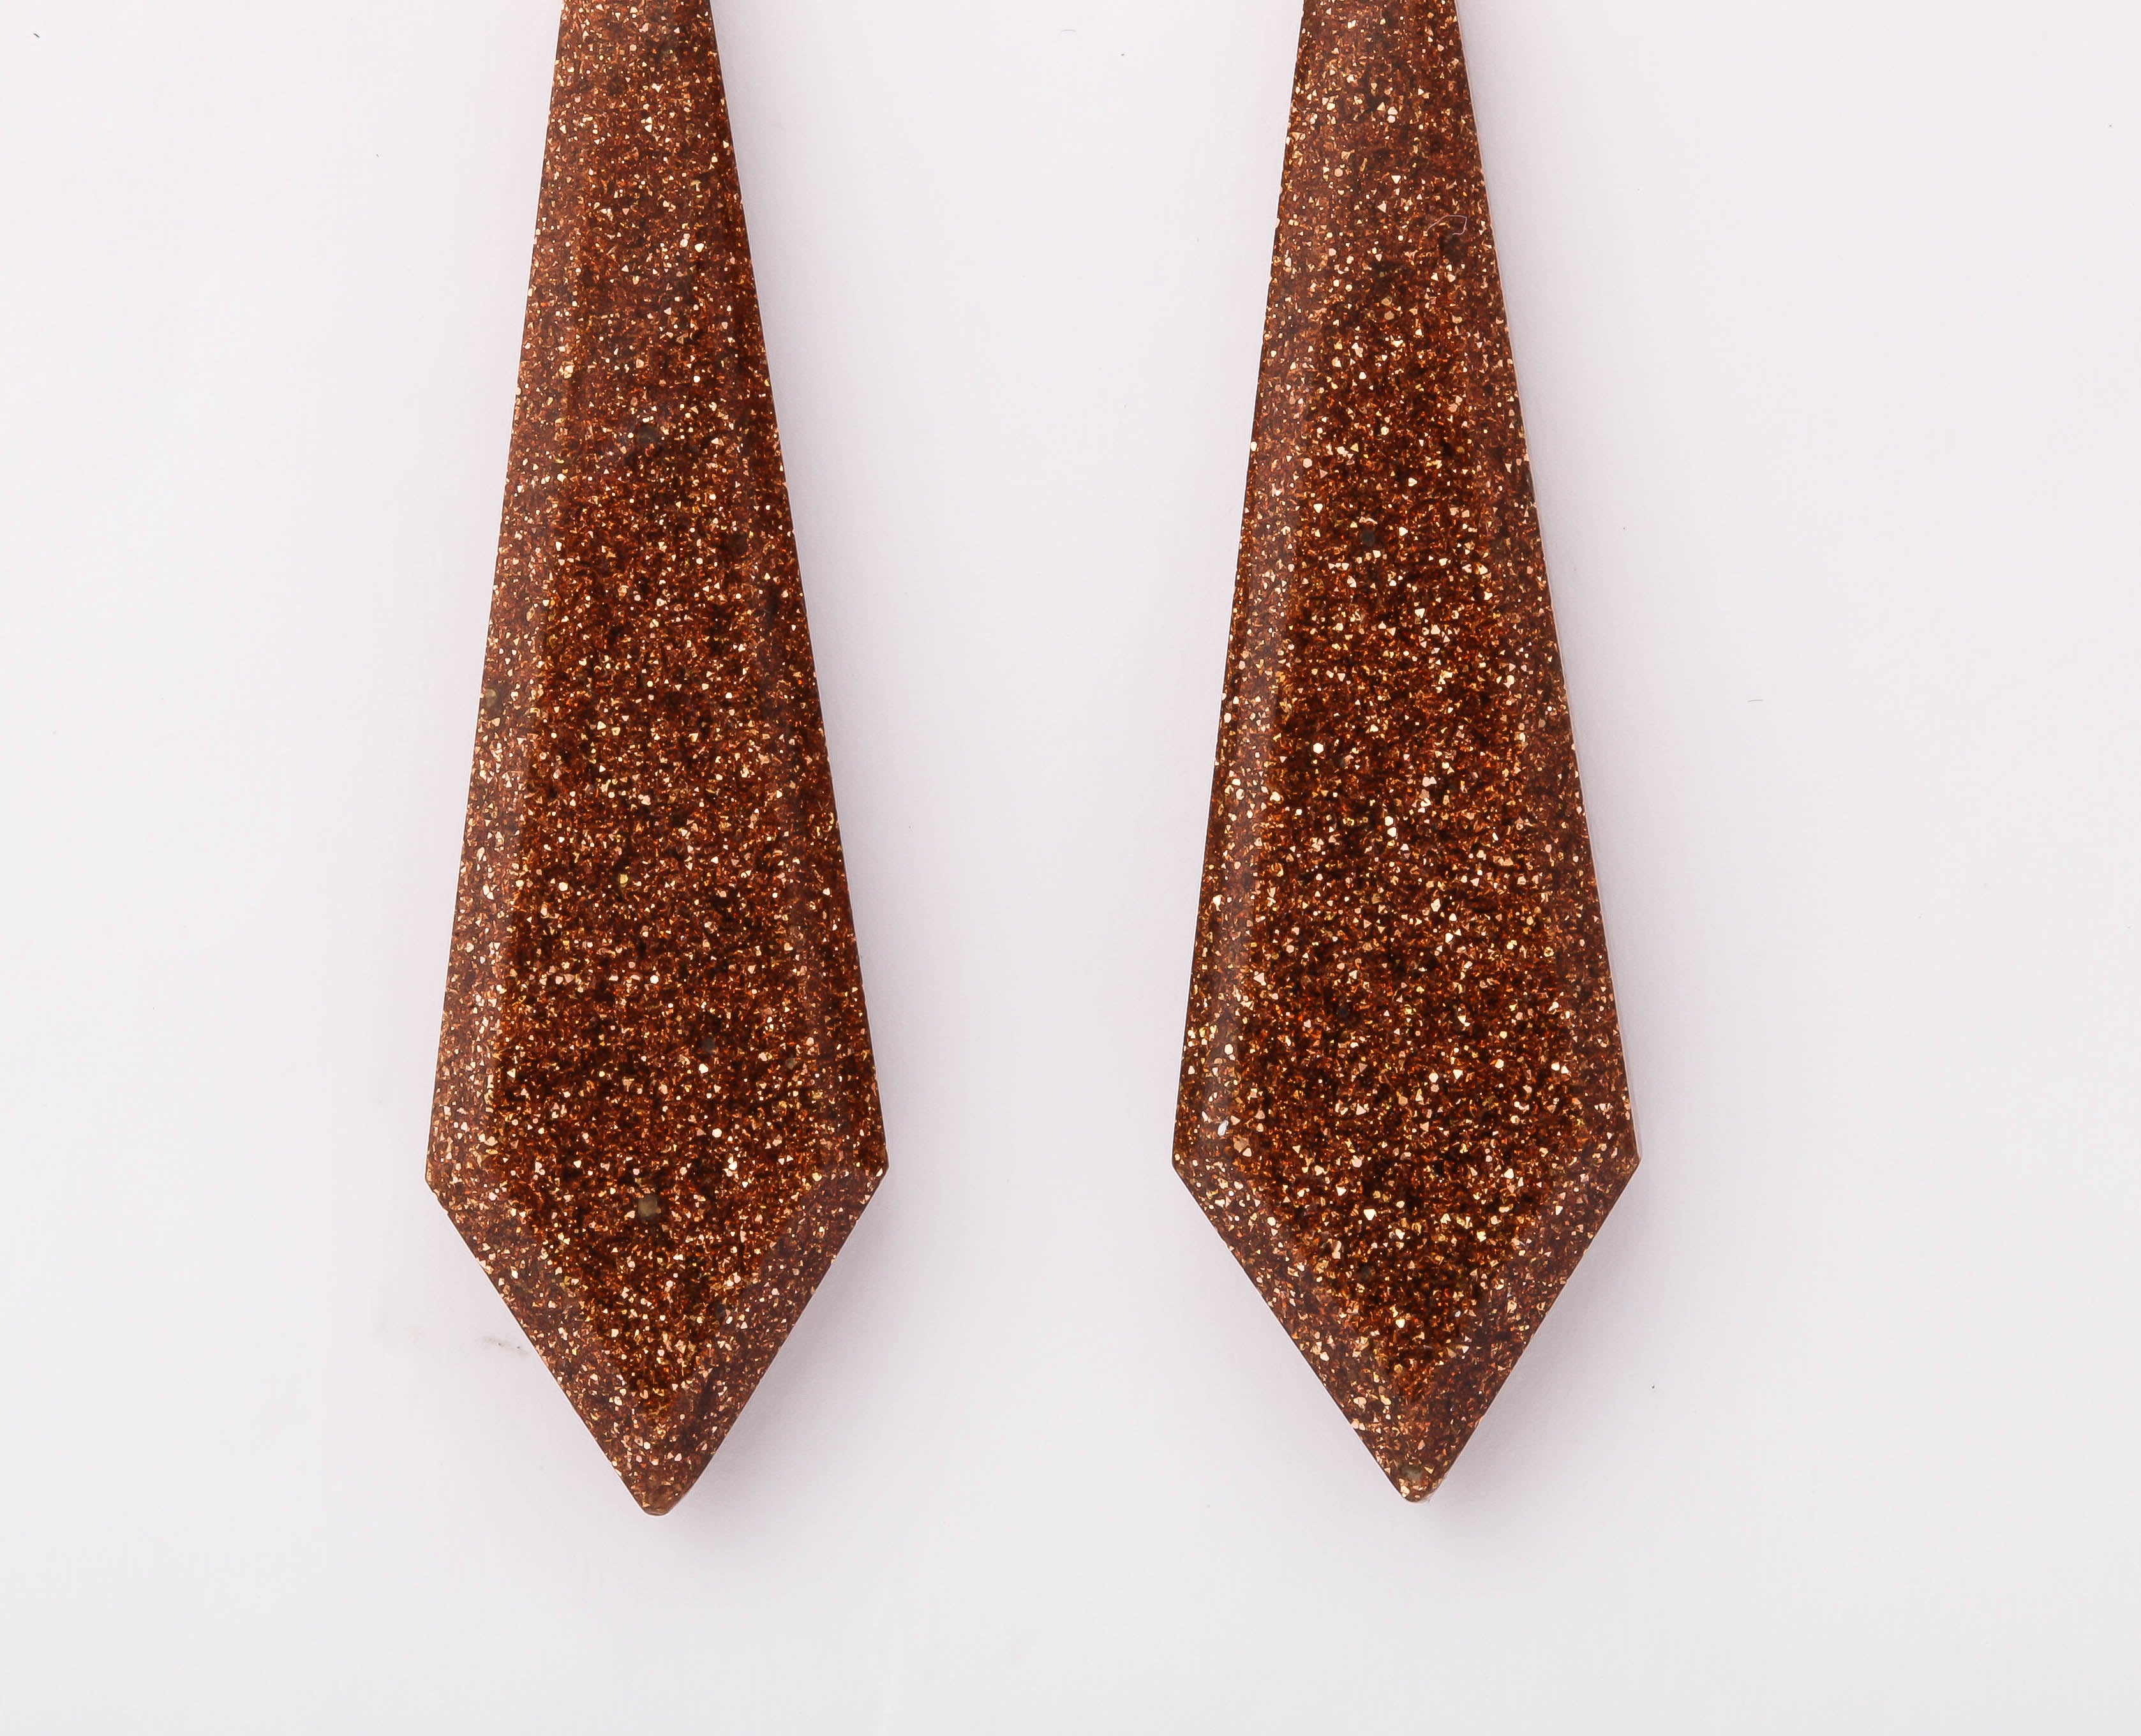 Enlarge the photograph please and imagine the Intense golden micro spots that radiate within these chandelier goldstone earrings from c. 1870. Imagine the brightest sun on water. The gold sparkle is highly concentrated on the background copper color